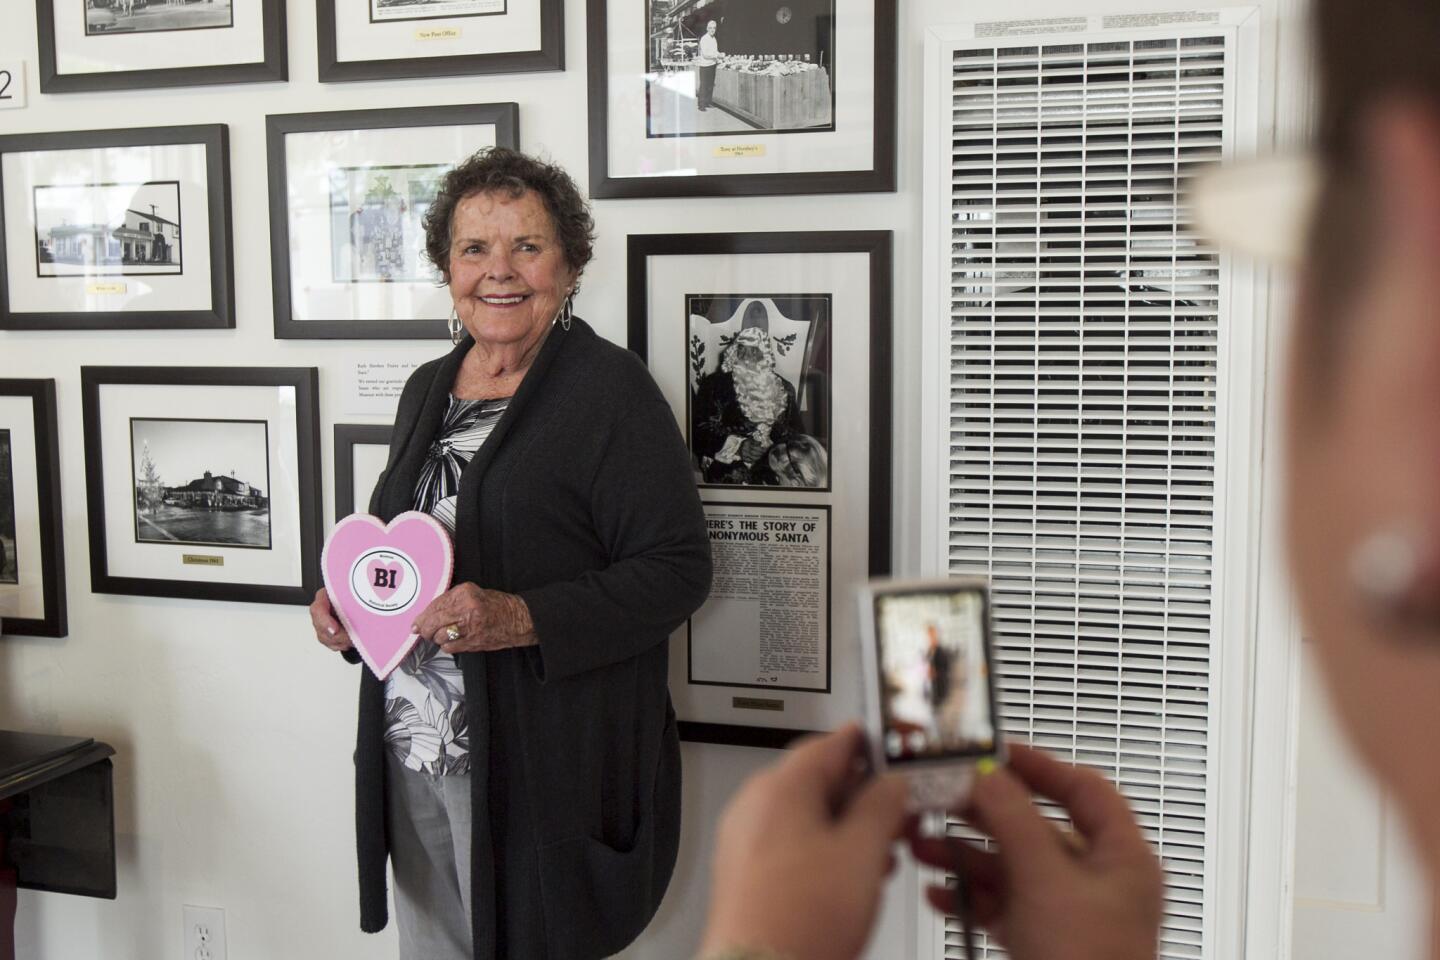 Sharon Lambert takes the photo of Marcia Working who wrote a love letter about Balboa Island at the Balboa Island Museum & Historical Society on Saturday, February 15. (Scott Smeltzer, Daily Pilot)